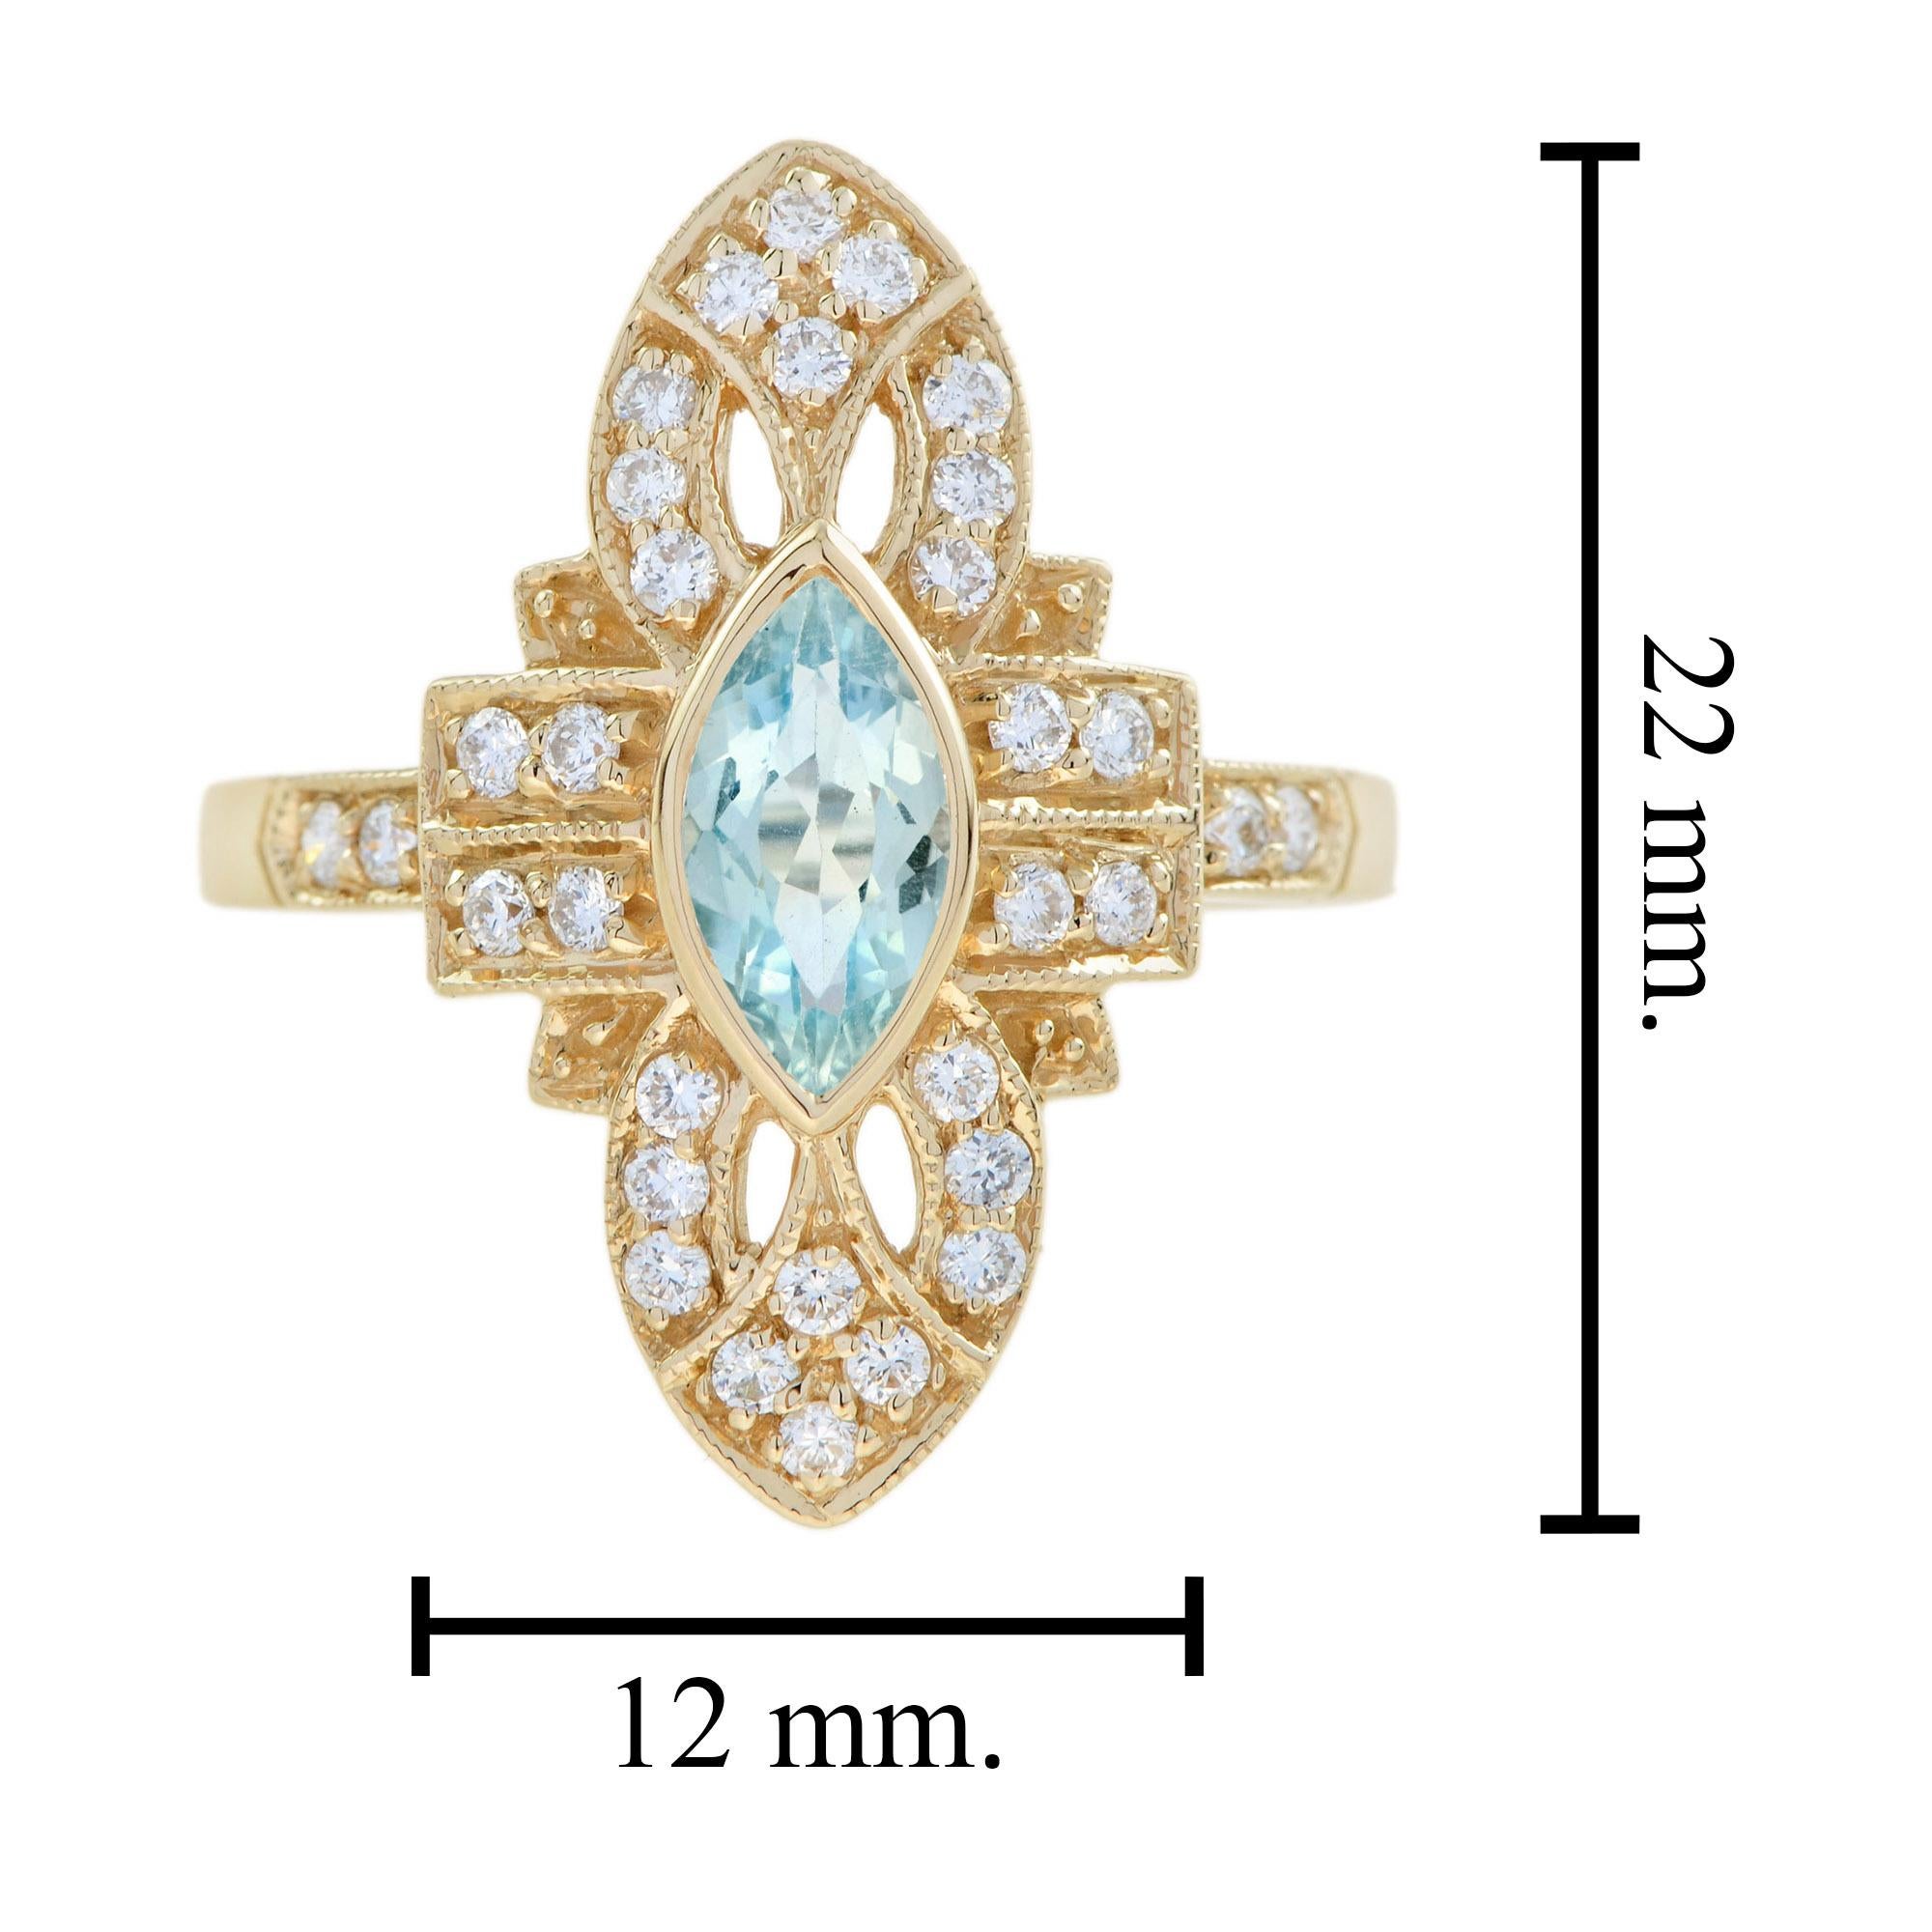 For Sale:  Aquamarine and Diamond Art Deco Style Marquise Shape Ring in 18K Yellow Gold 7